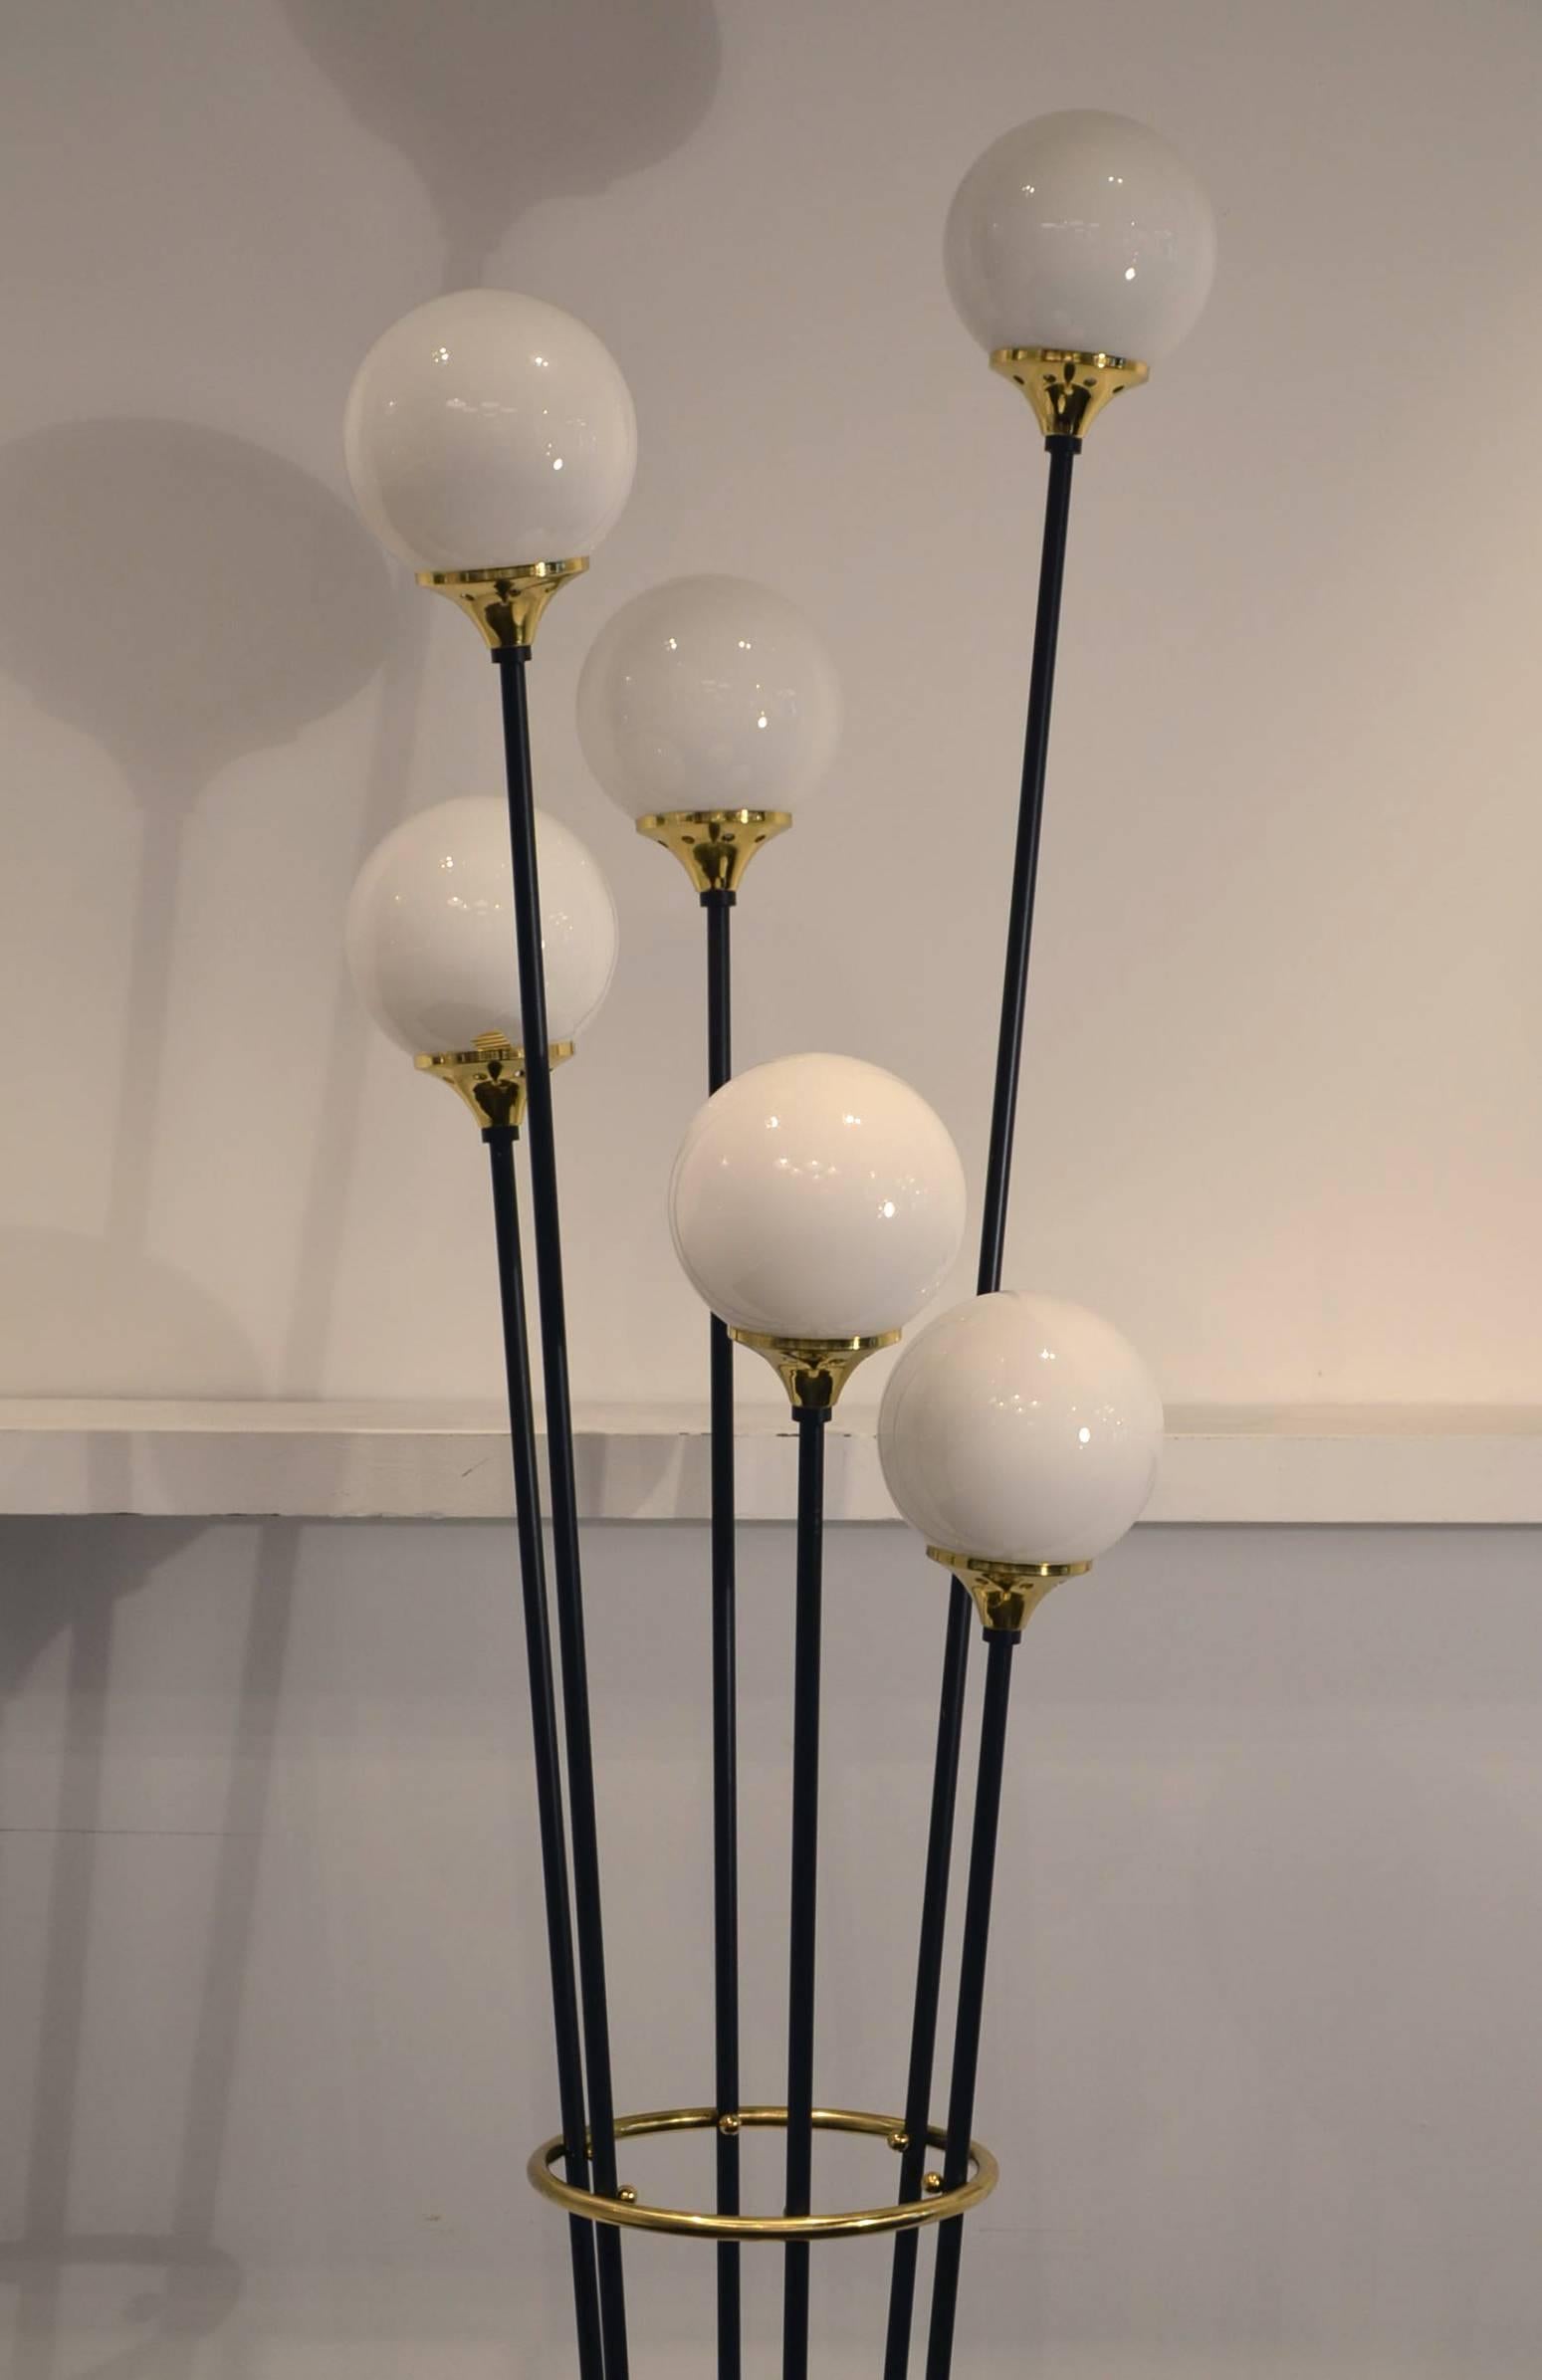 Mid-Century floor lamp by Stilnovo, with a set of six opaque globes and marble base. Measures: Height: 180, diameter base: 30 cm, diameter lamp: 40 cm.